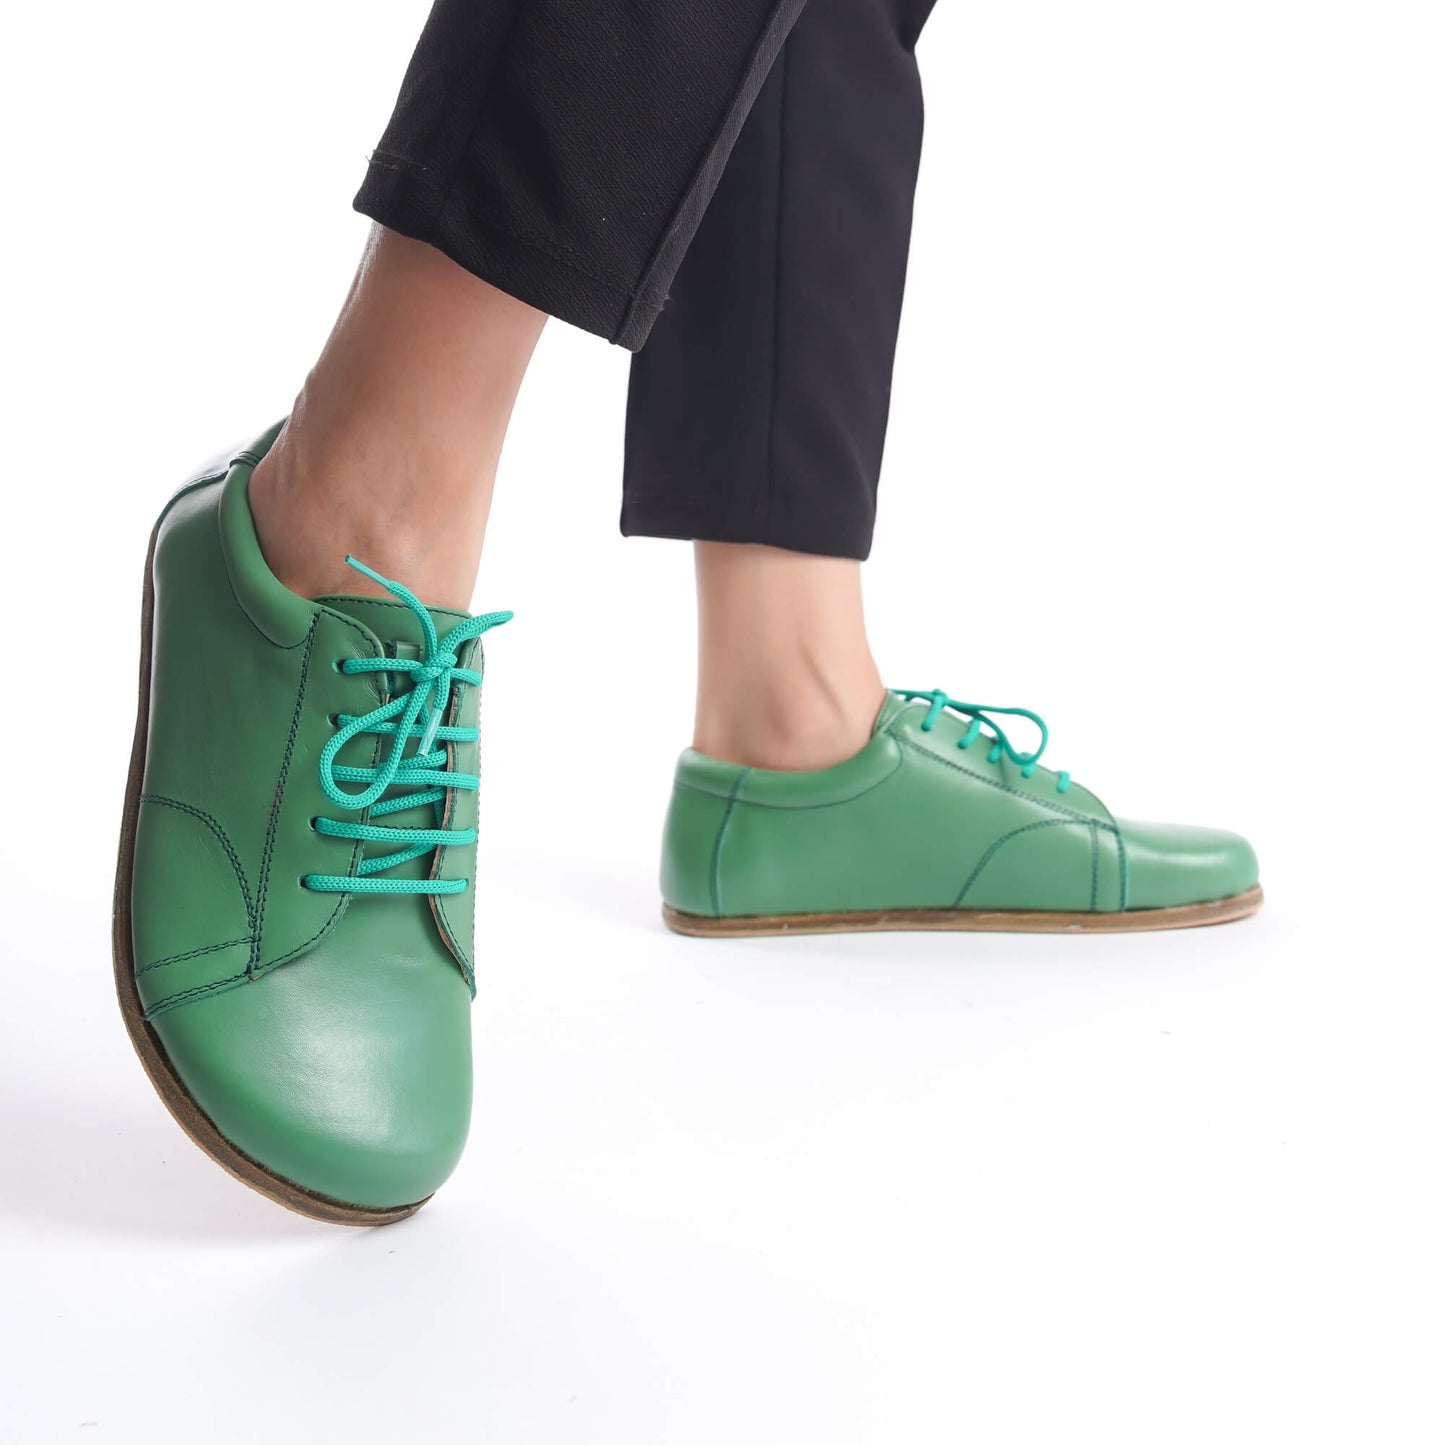 Close-up of green Lydia leather barefoot women's sneakers with turquoise laces, highlighting their minimalist design and genuine leather material.